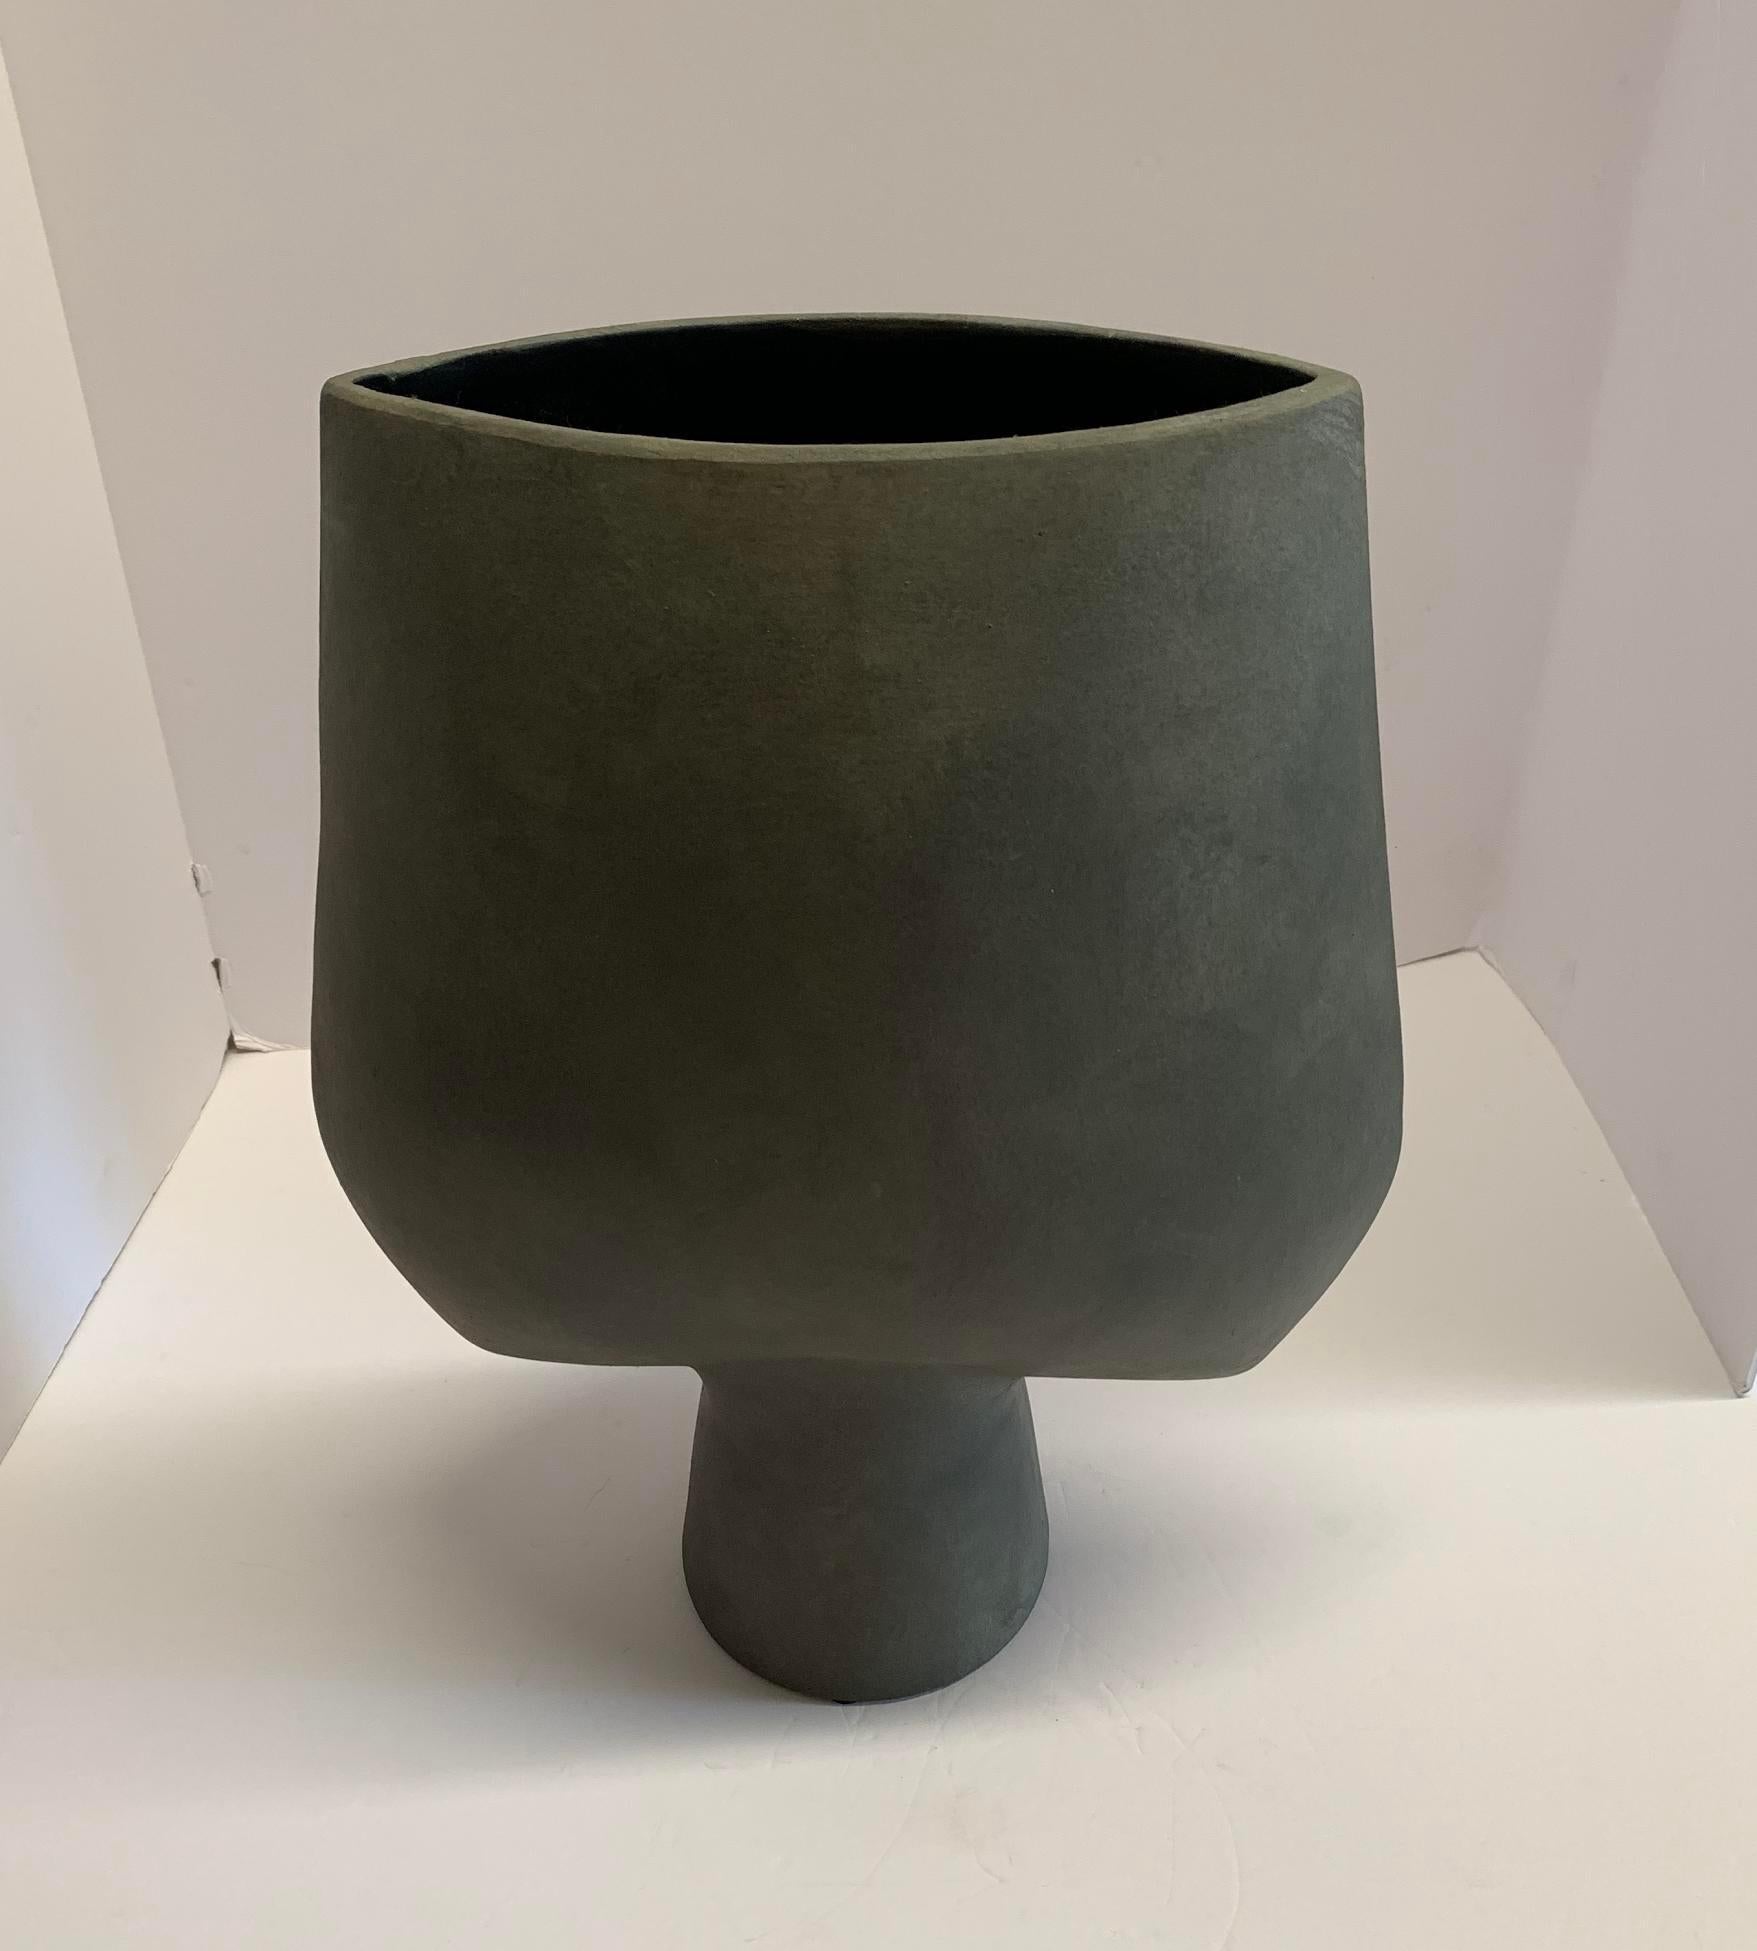 Contemporary Danish design tall matte grey ceramic vase.
Arrow shaped top with tubular shaped base.
Matte grey glaze.
One of a collection of many shapes and sizes.
Two available and sold individually.

 